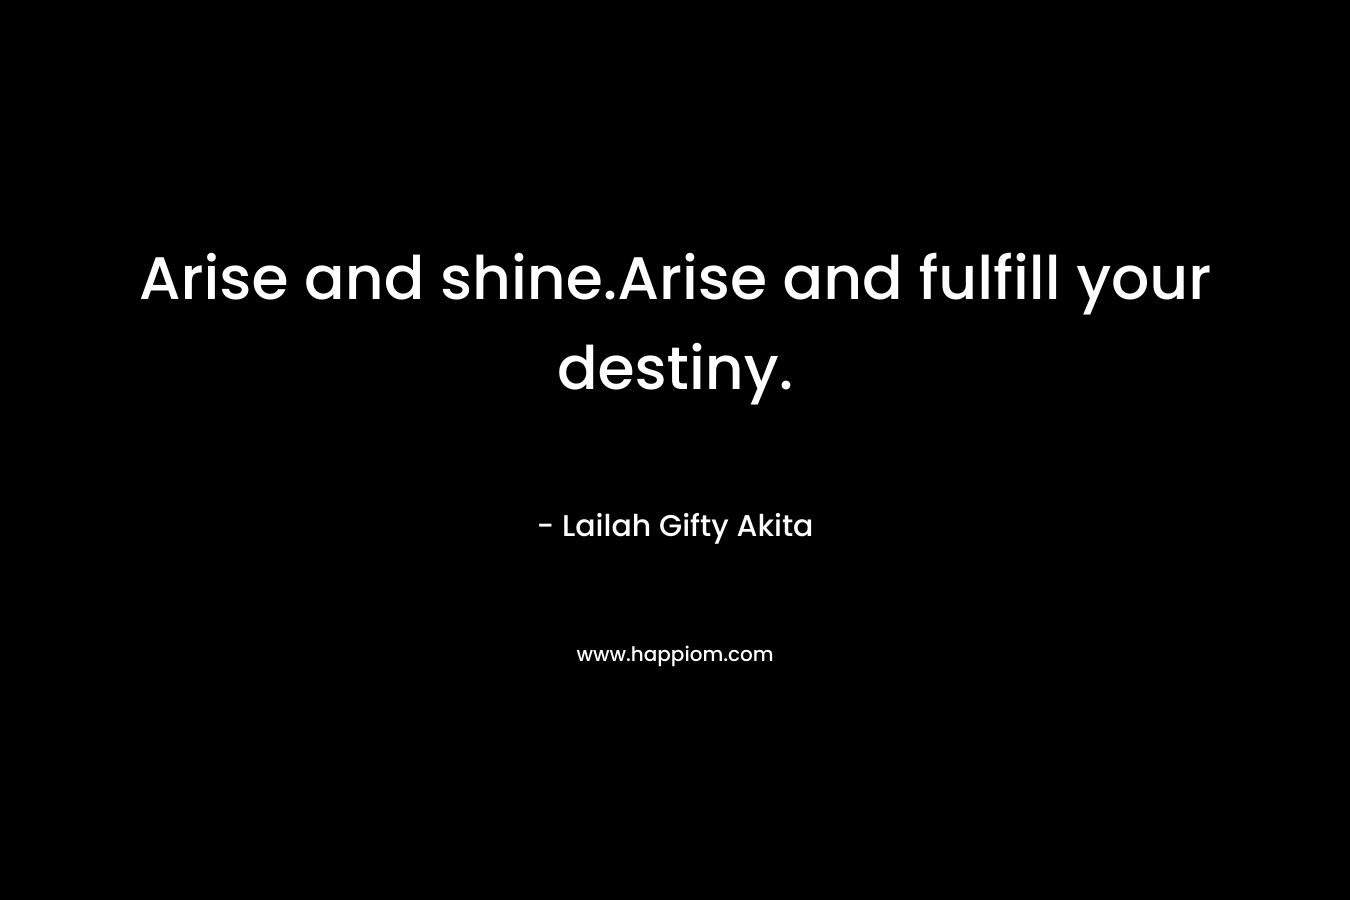 Arise and shine.Arise and fulfill your destiny.